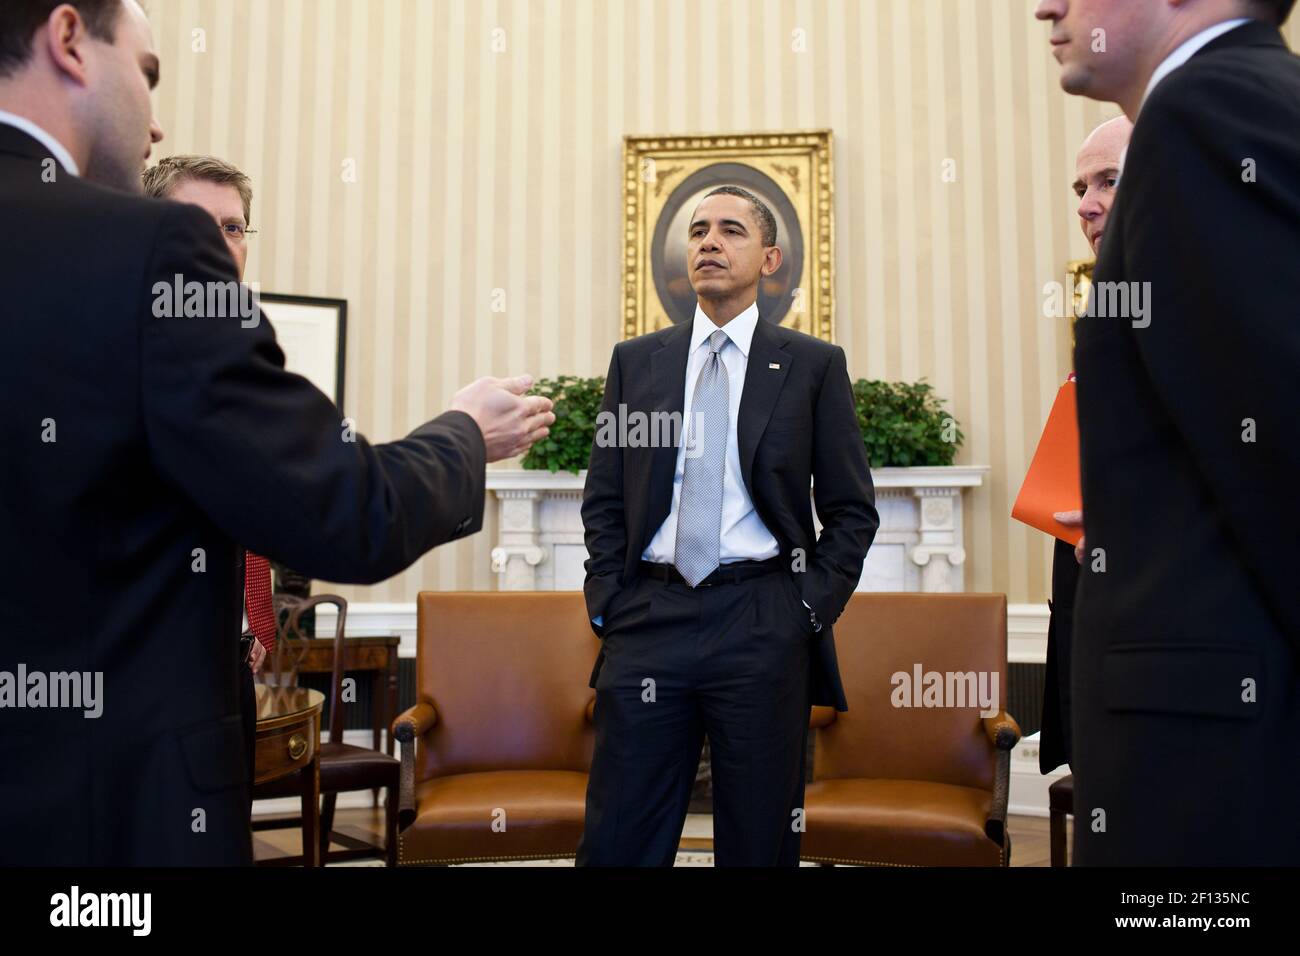 President Barack Obama talks with senior advisors following a meeting in the Oval Office March 3 2011. Fom left: Deputy National Security Advisor for Strategic Communication Ben Rhodes; Press Secretary Jay Carney; National Security Advisor Tom Donilon; and Dan Restrepo Senior Director for Western Hemisphere Affairs. Stock Photo